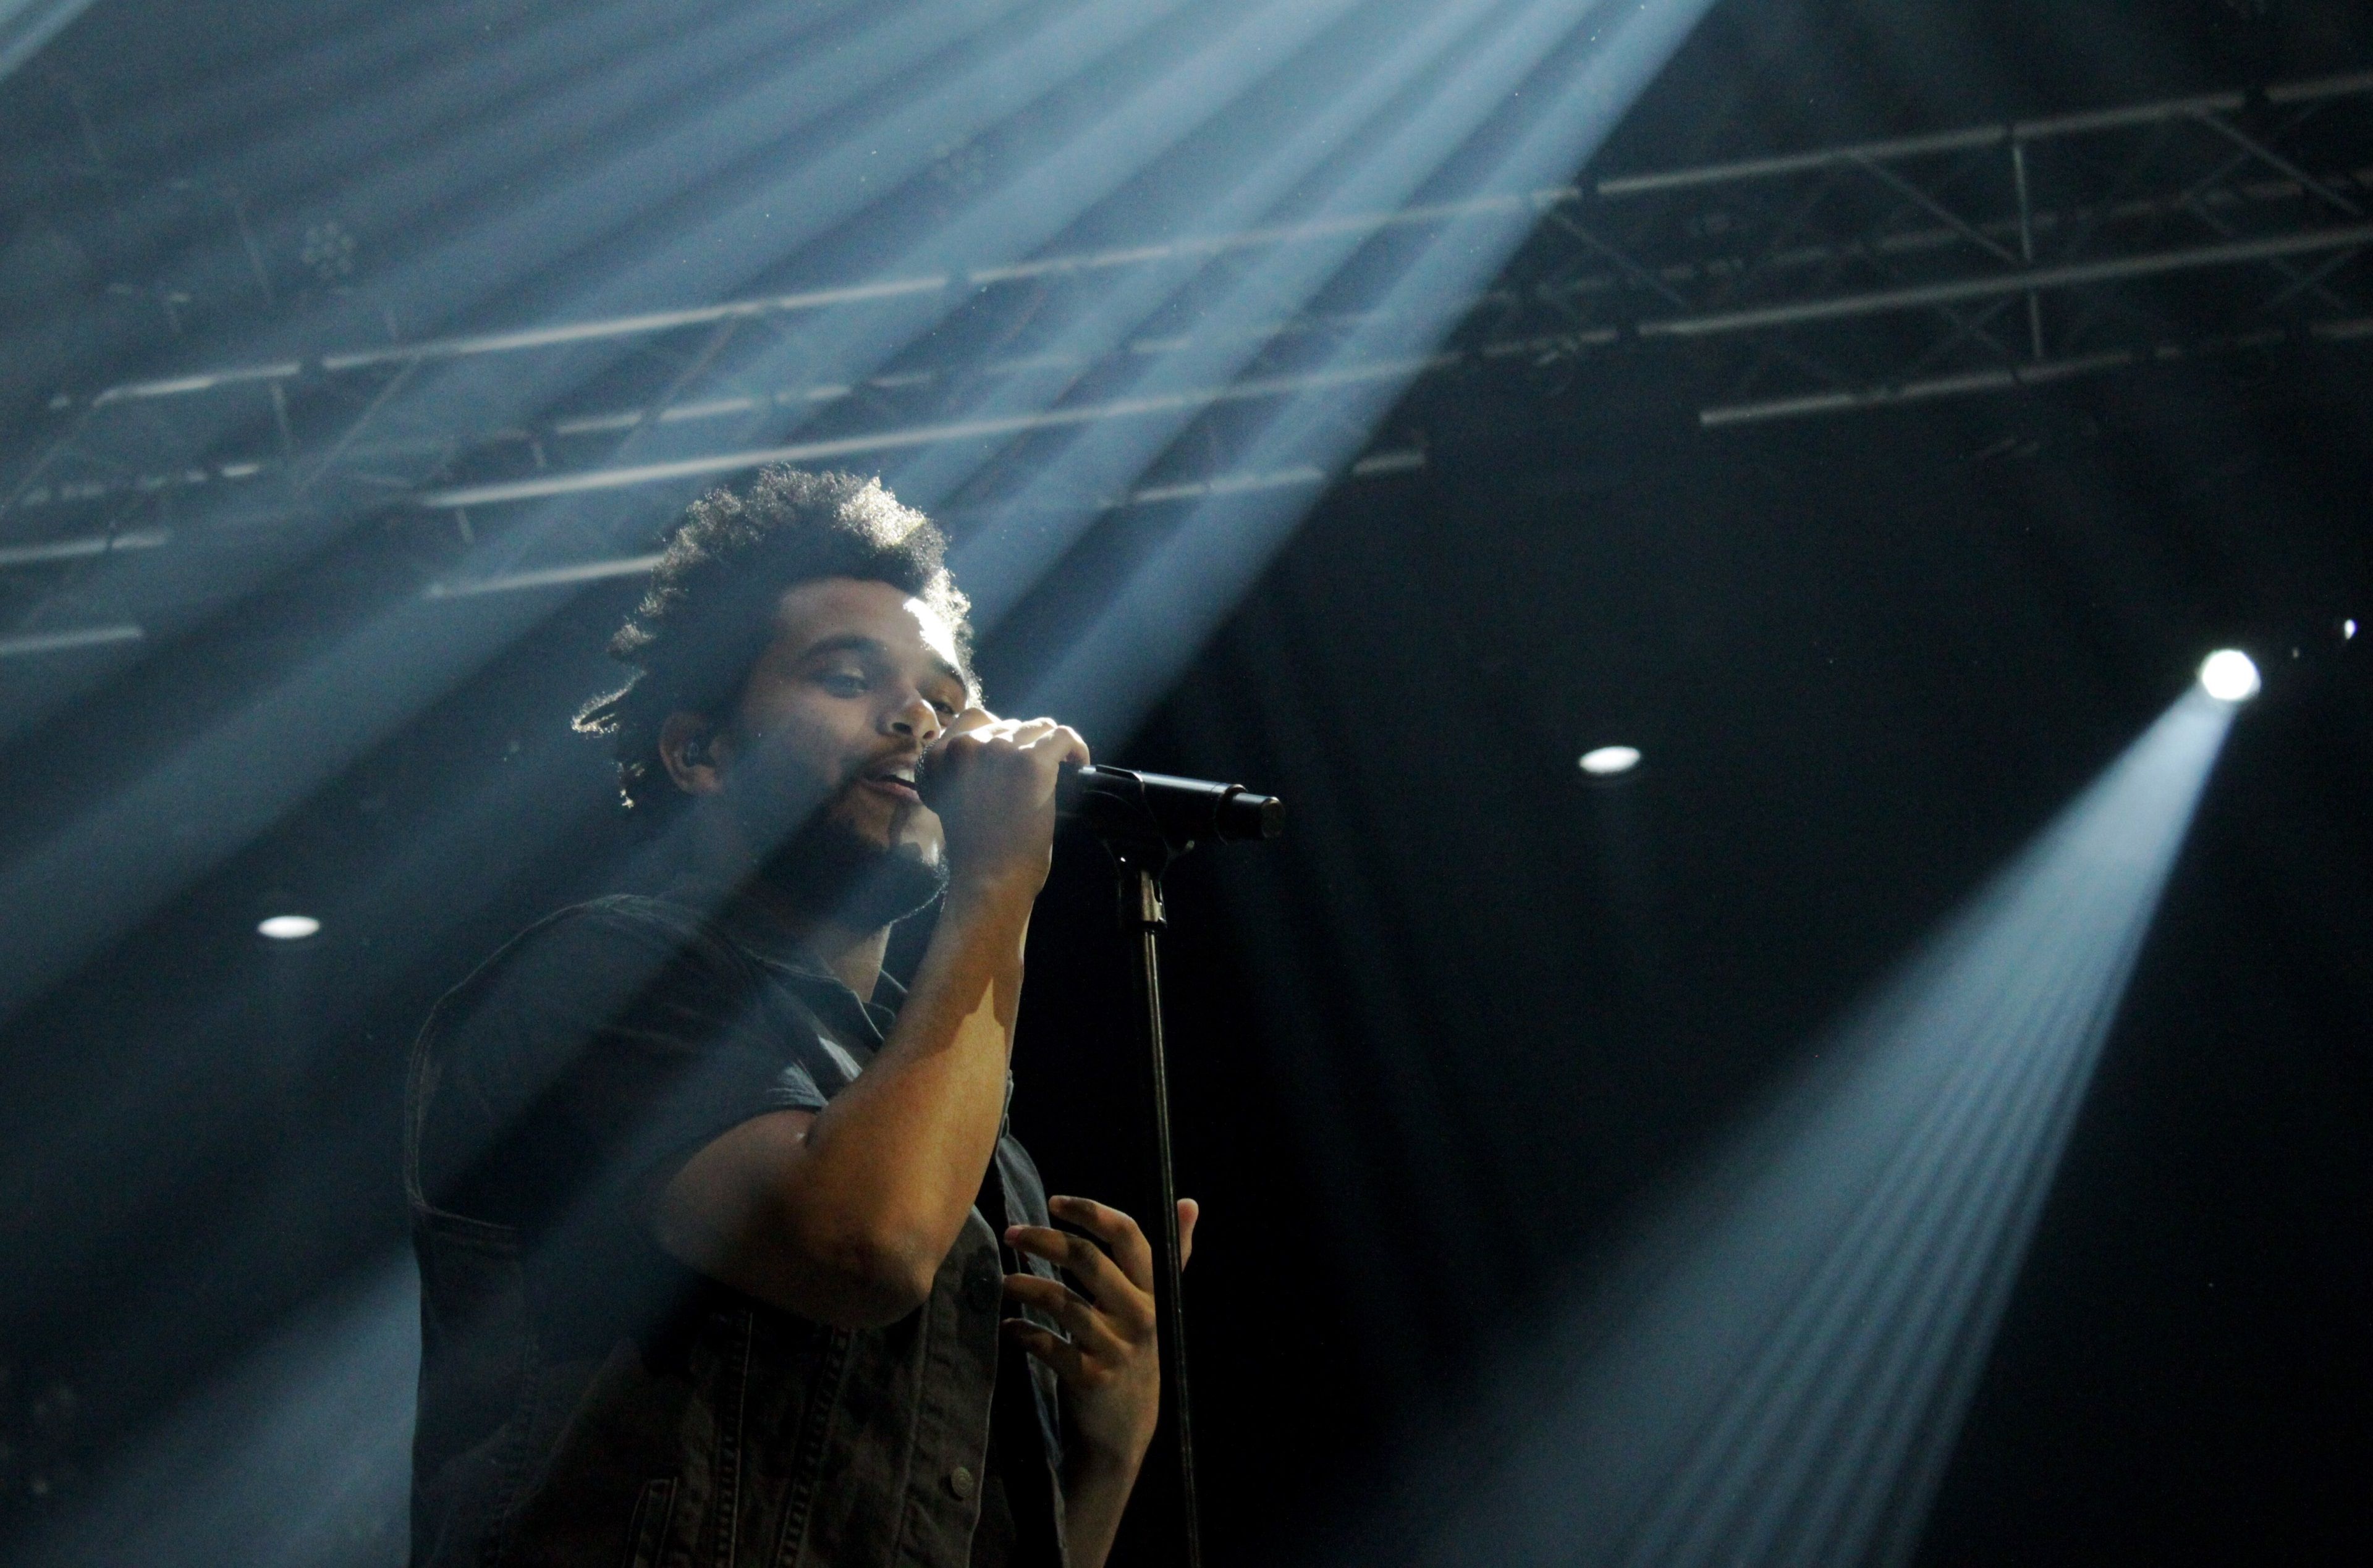 A man singing into microphone with lights shining on him - The Weeknd